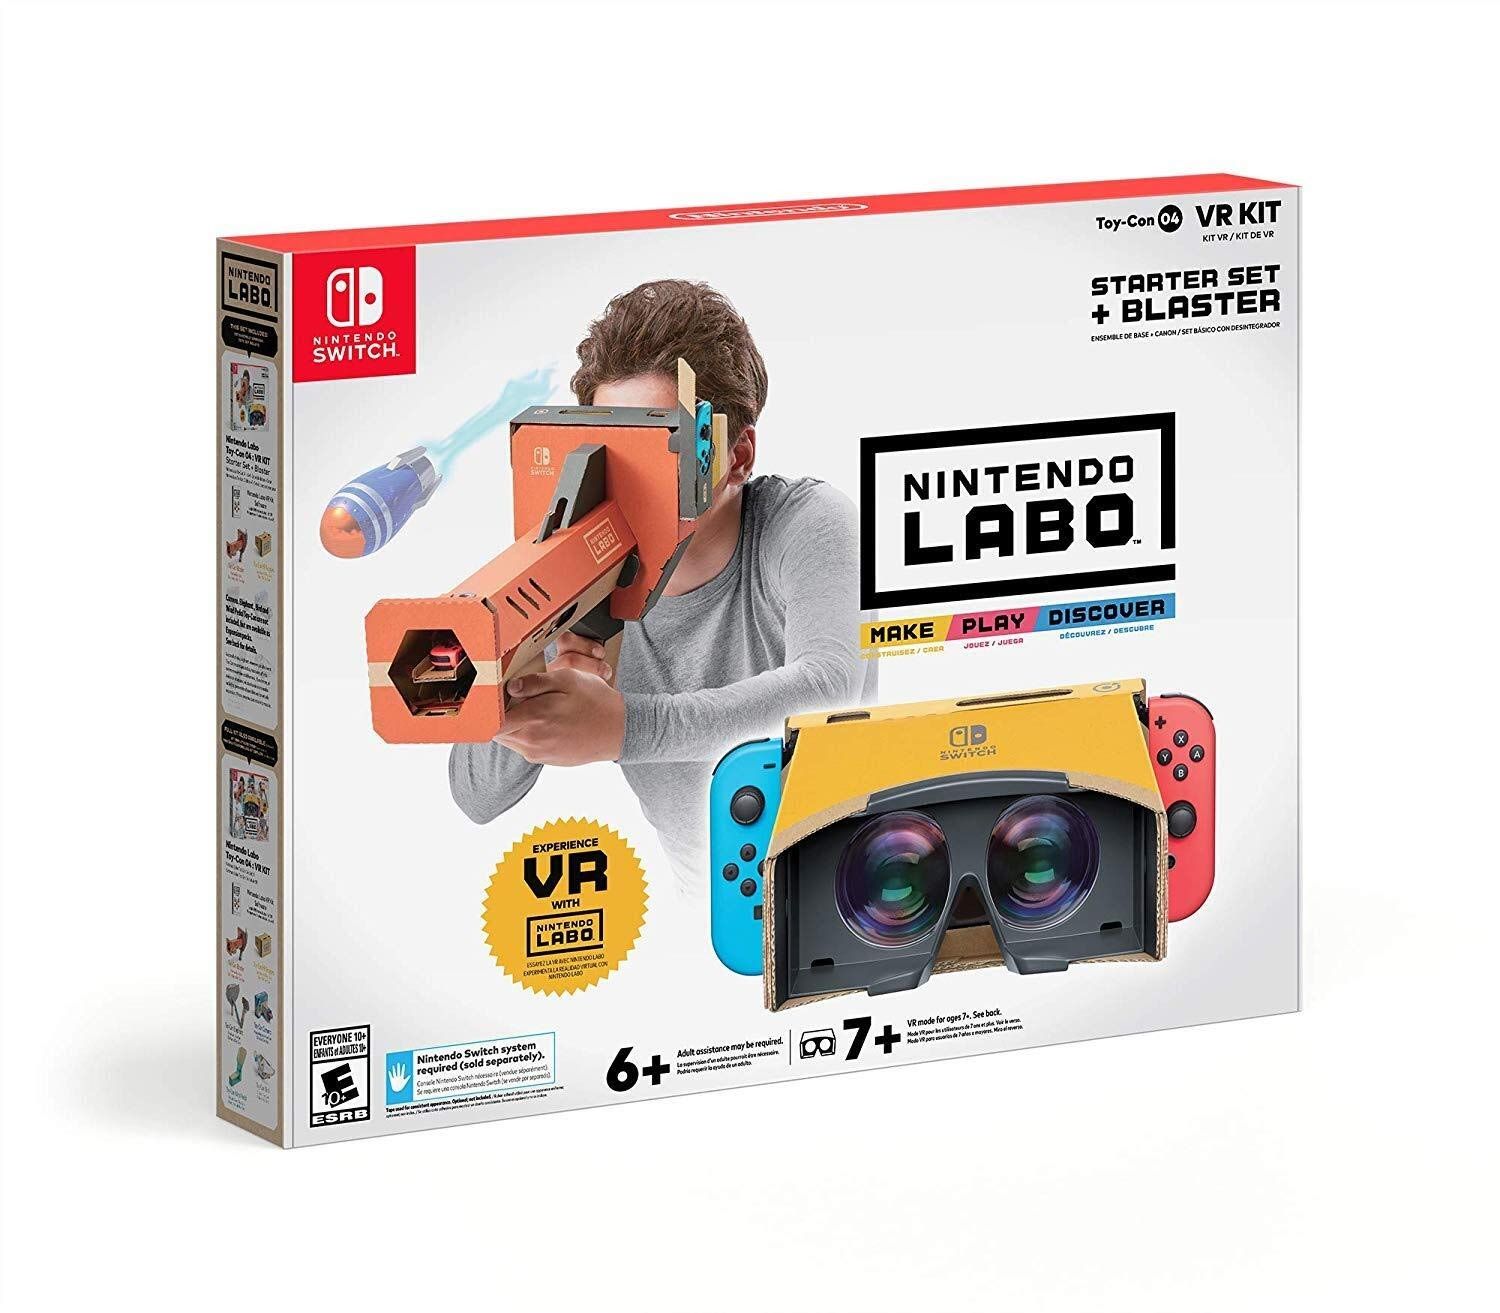 nintendo labo toy-con 04 vr set featuring a blaster and vr headset